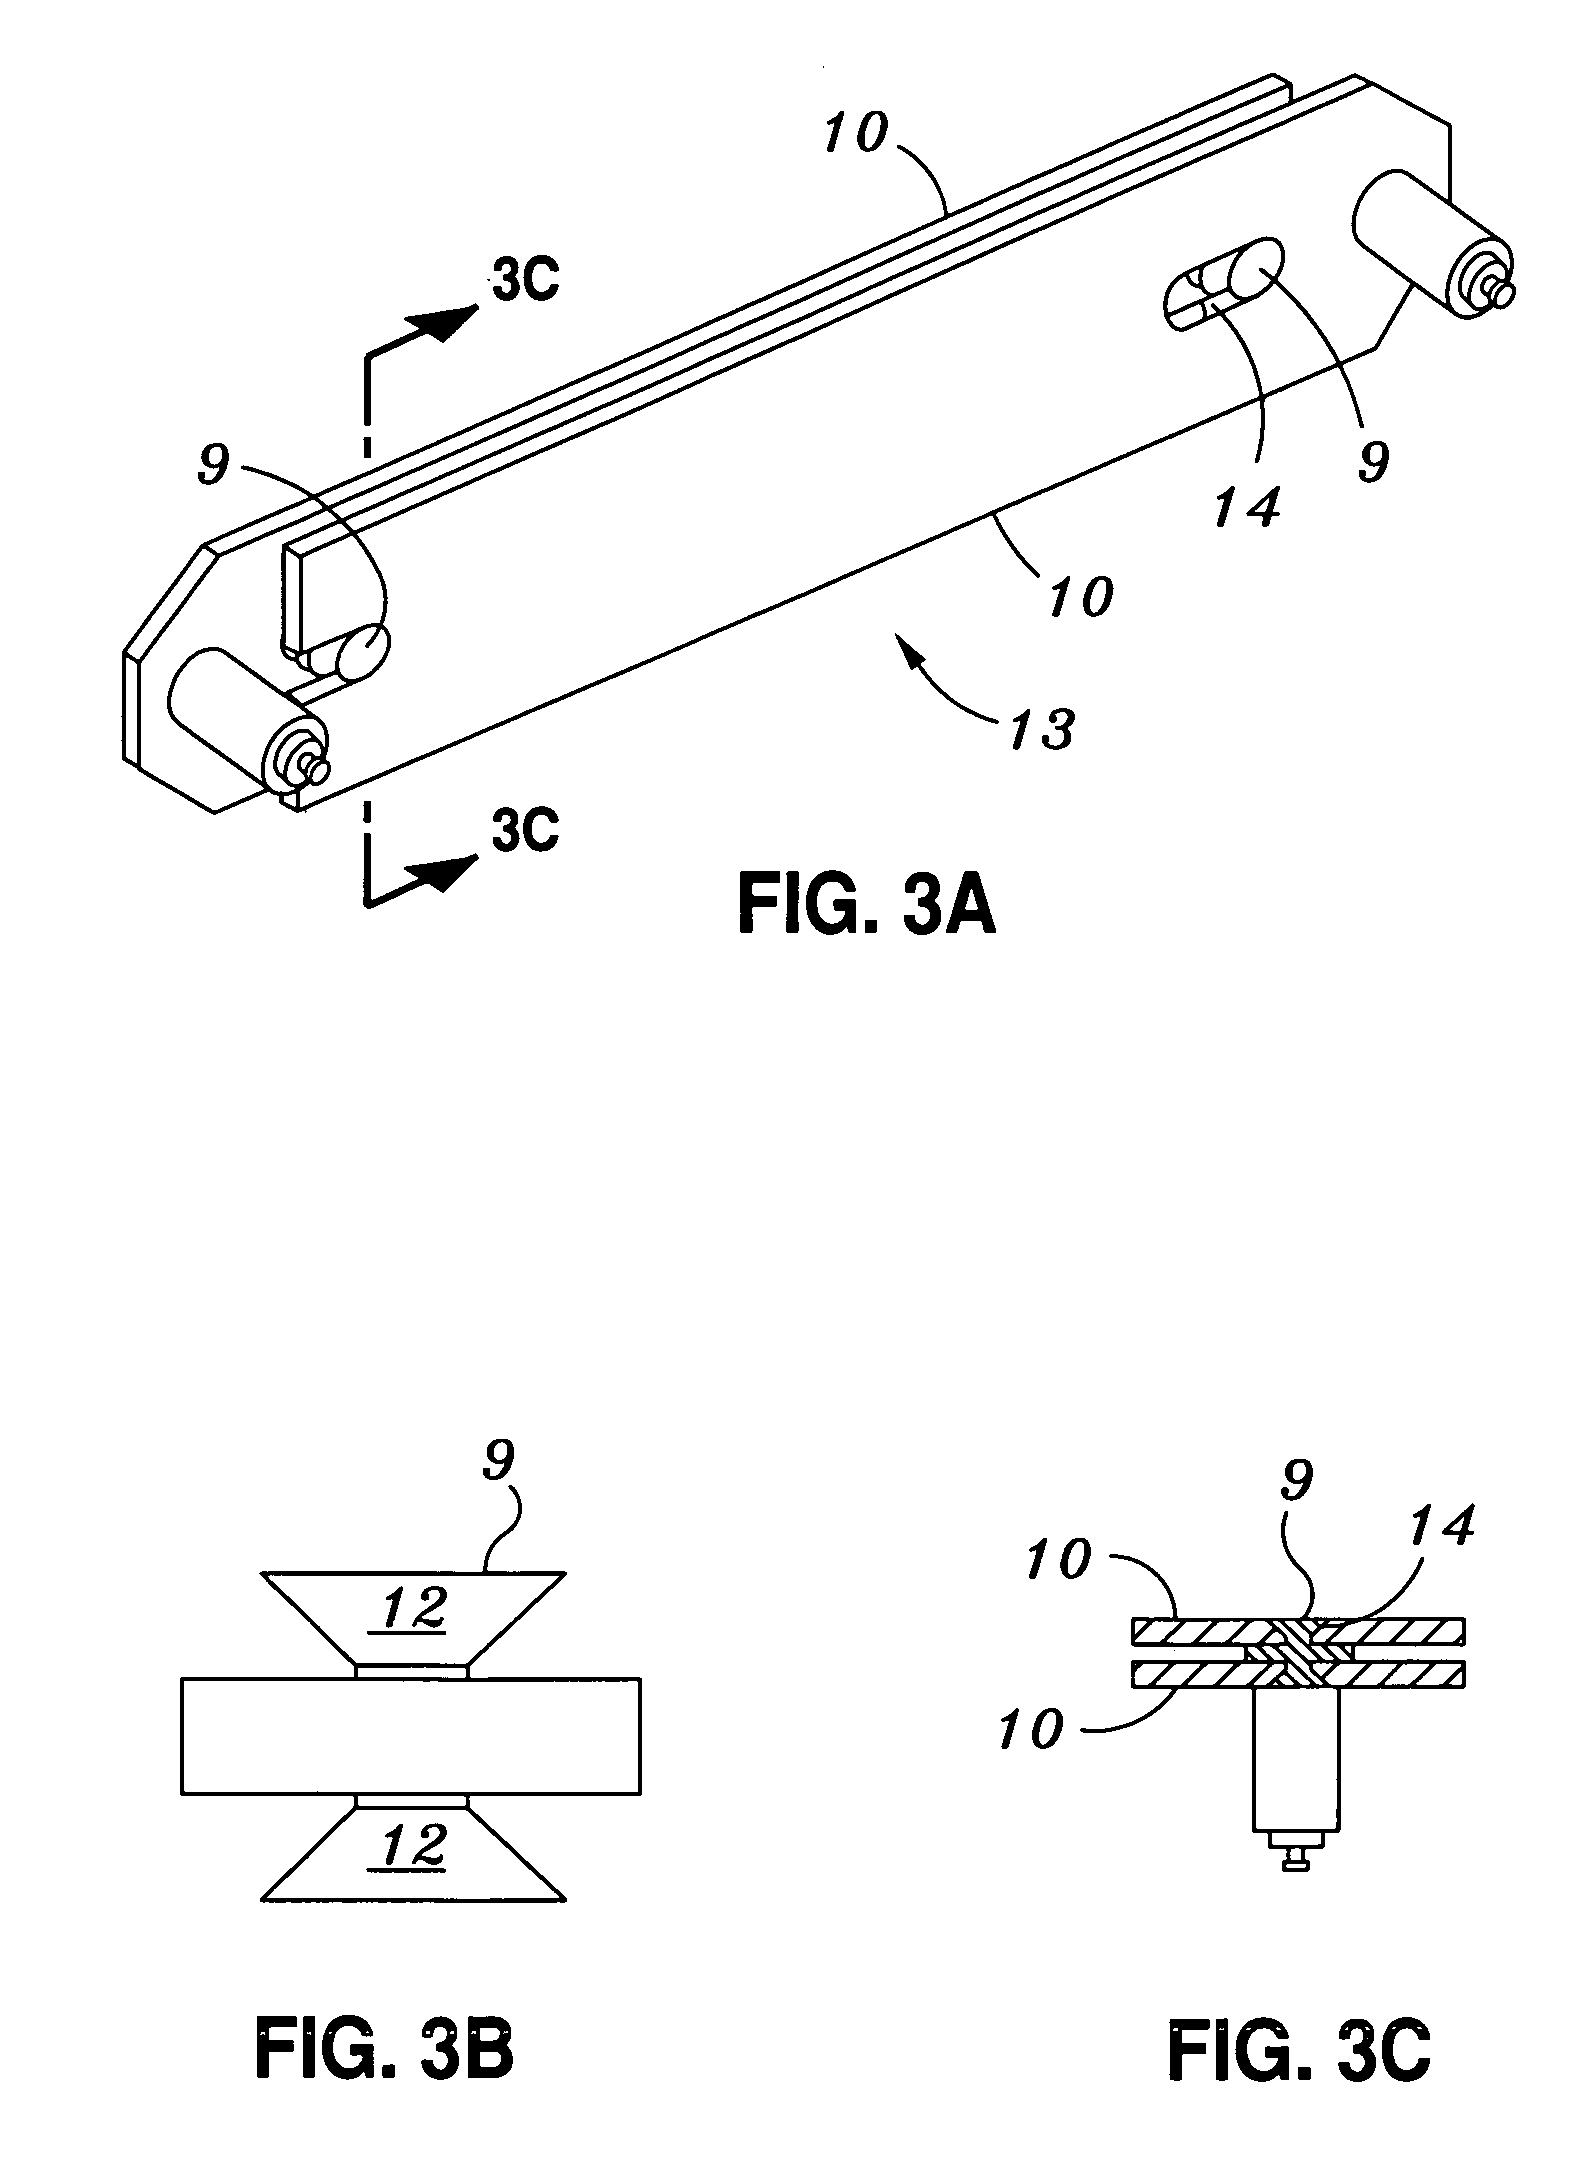 Infra-red radiant panel heater using PTC conductive polymeric electrodes